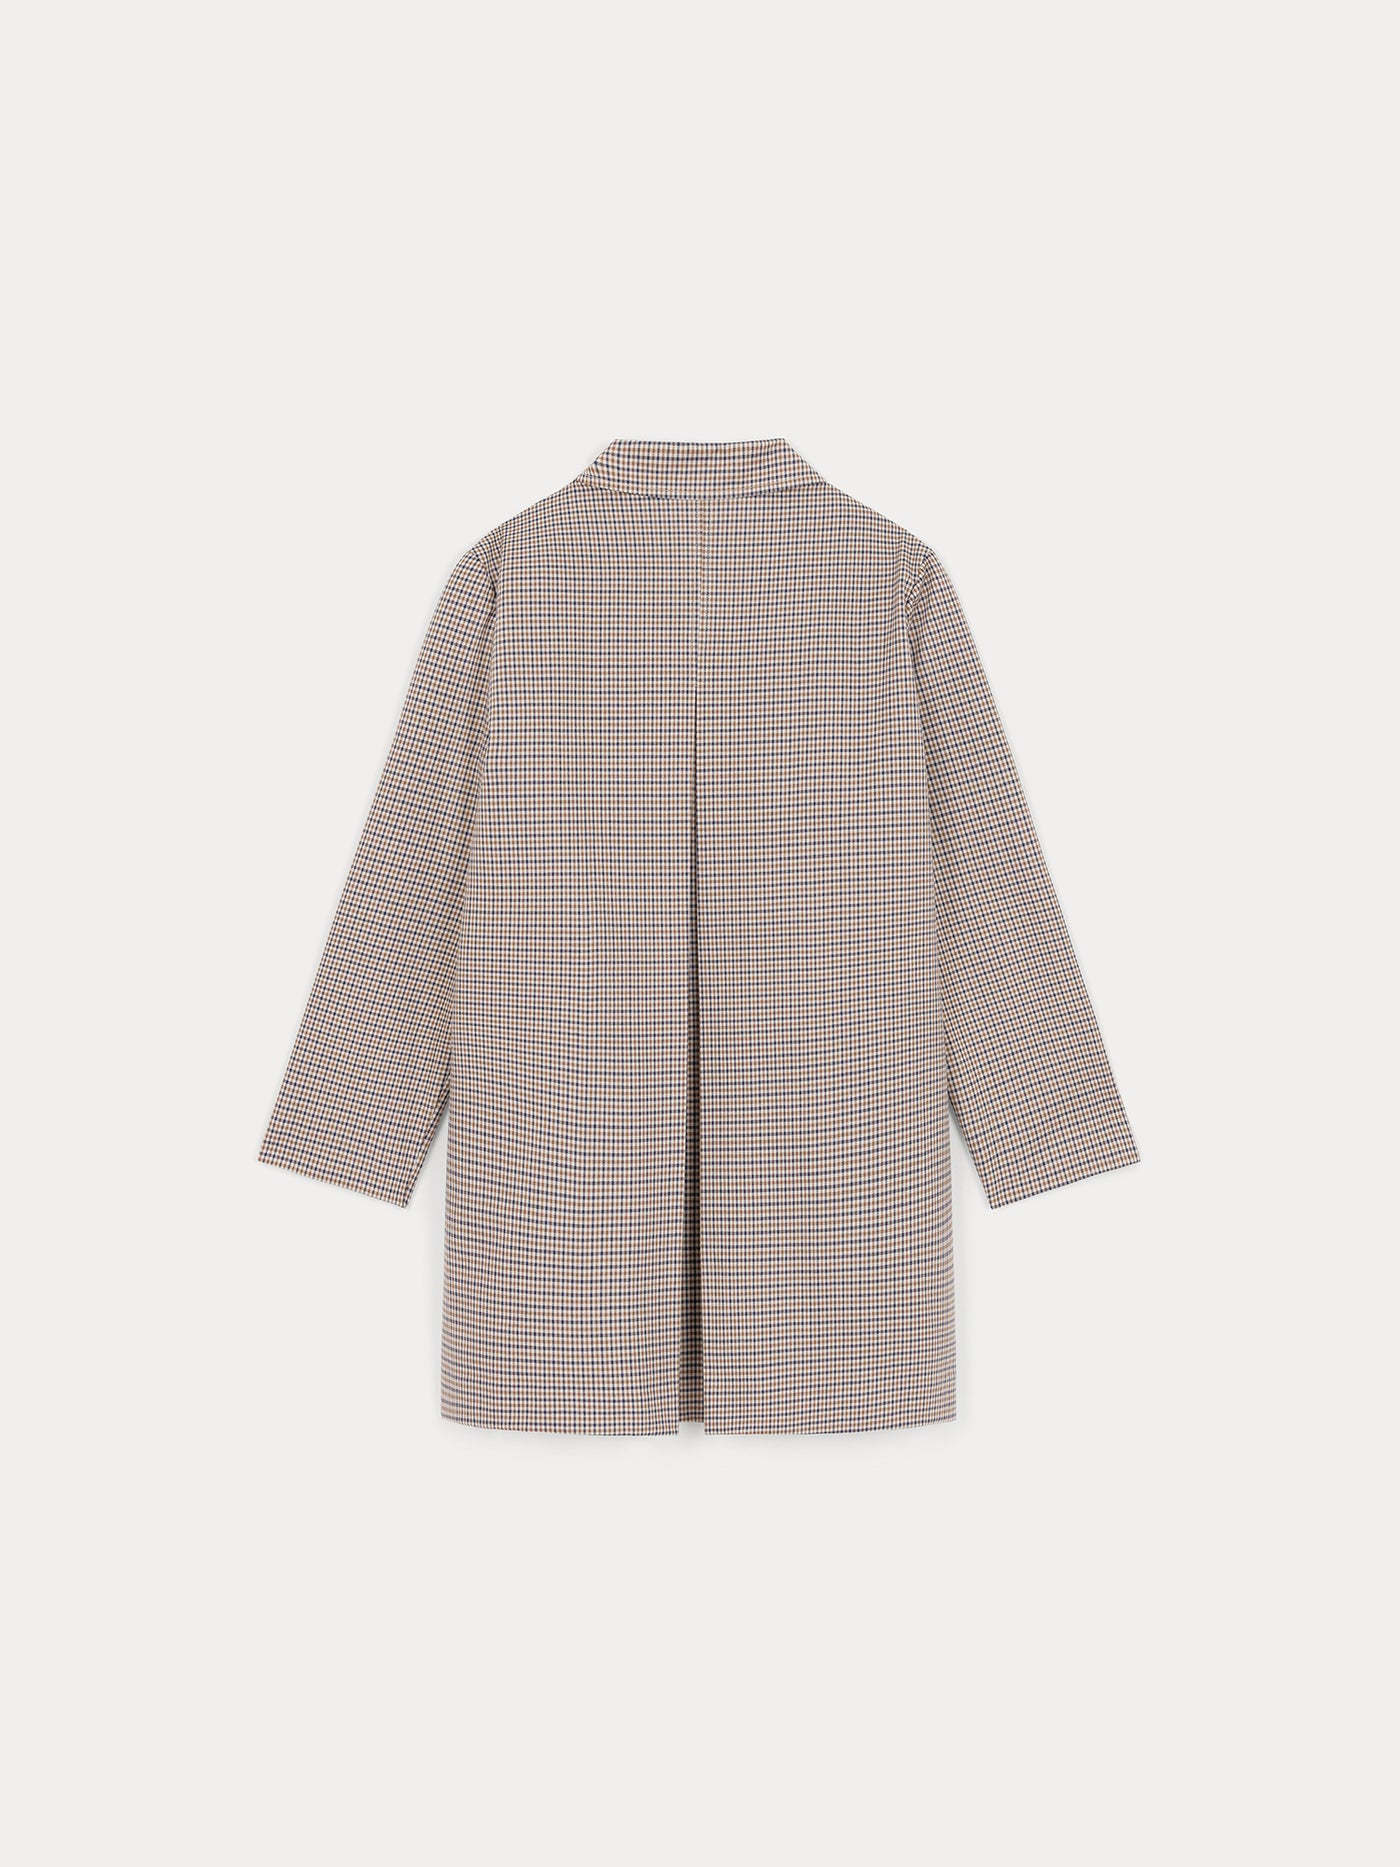 A-line four-button houndstooth coat